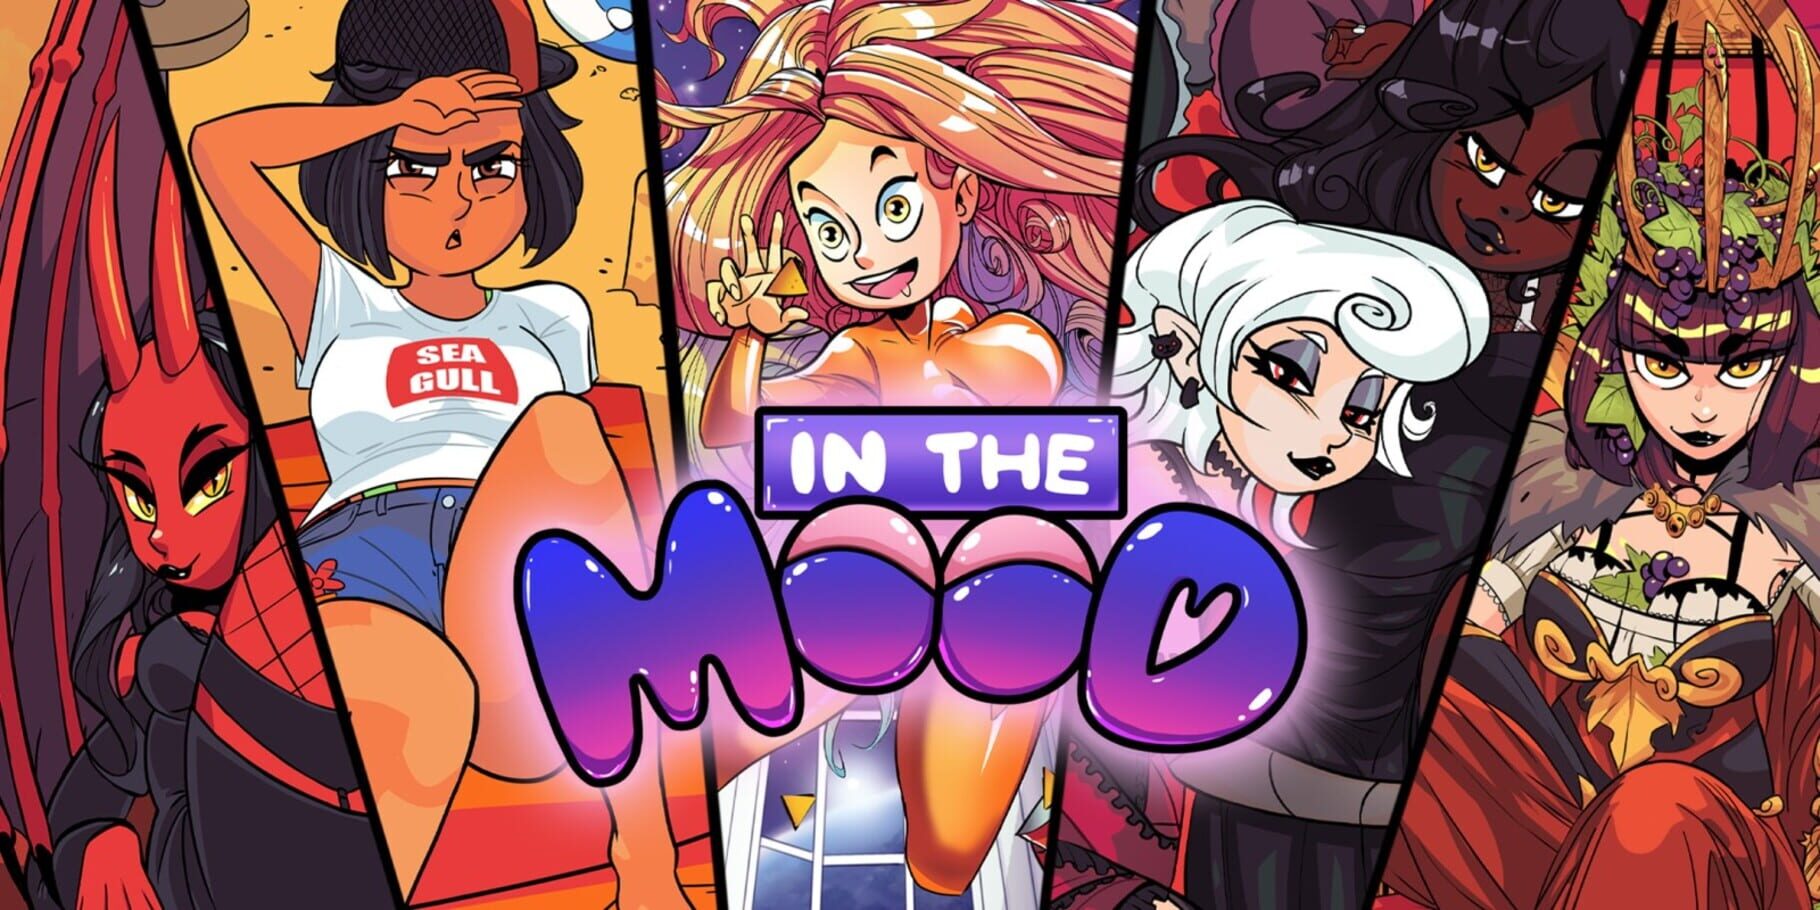 In the Mood artwork